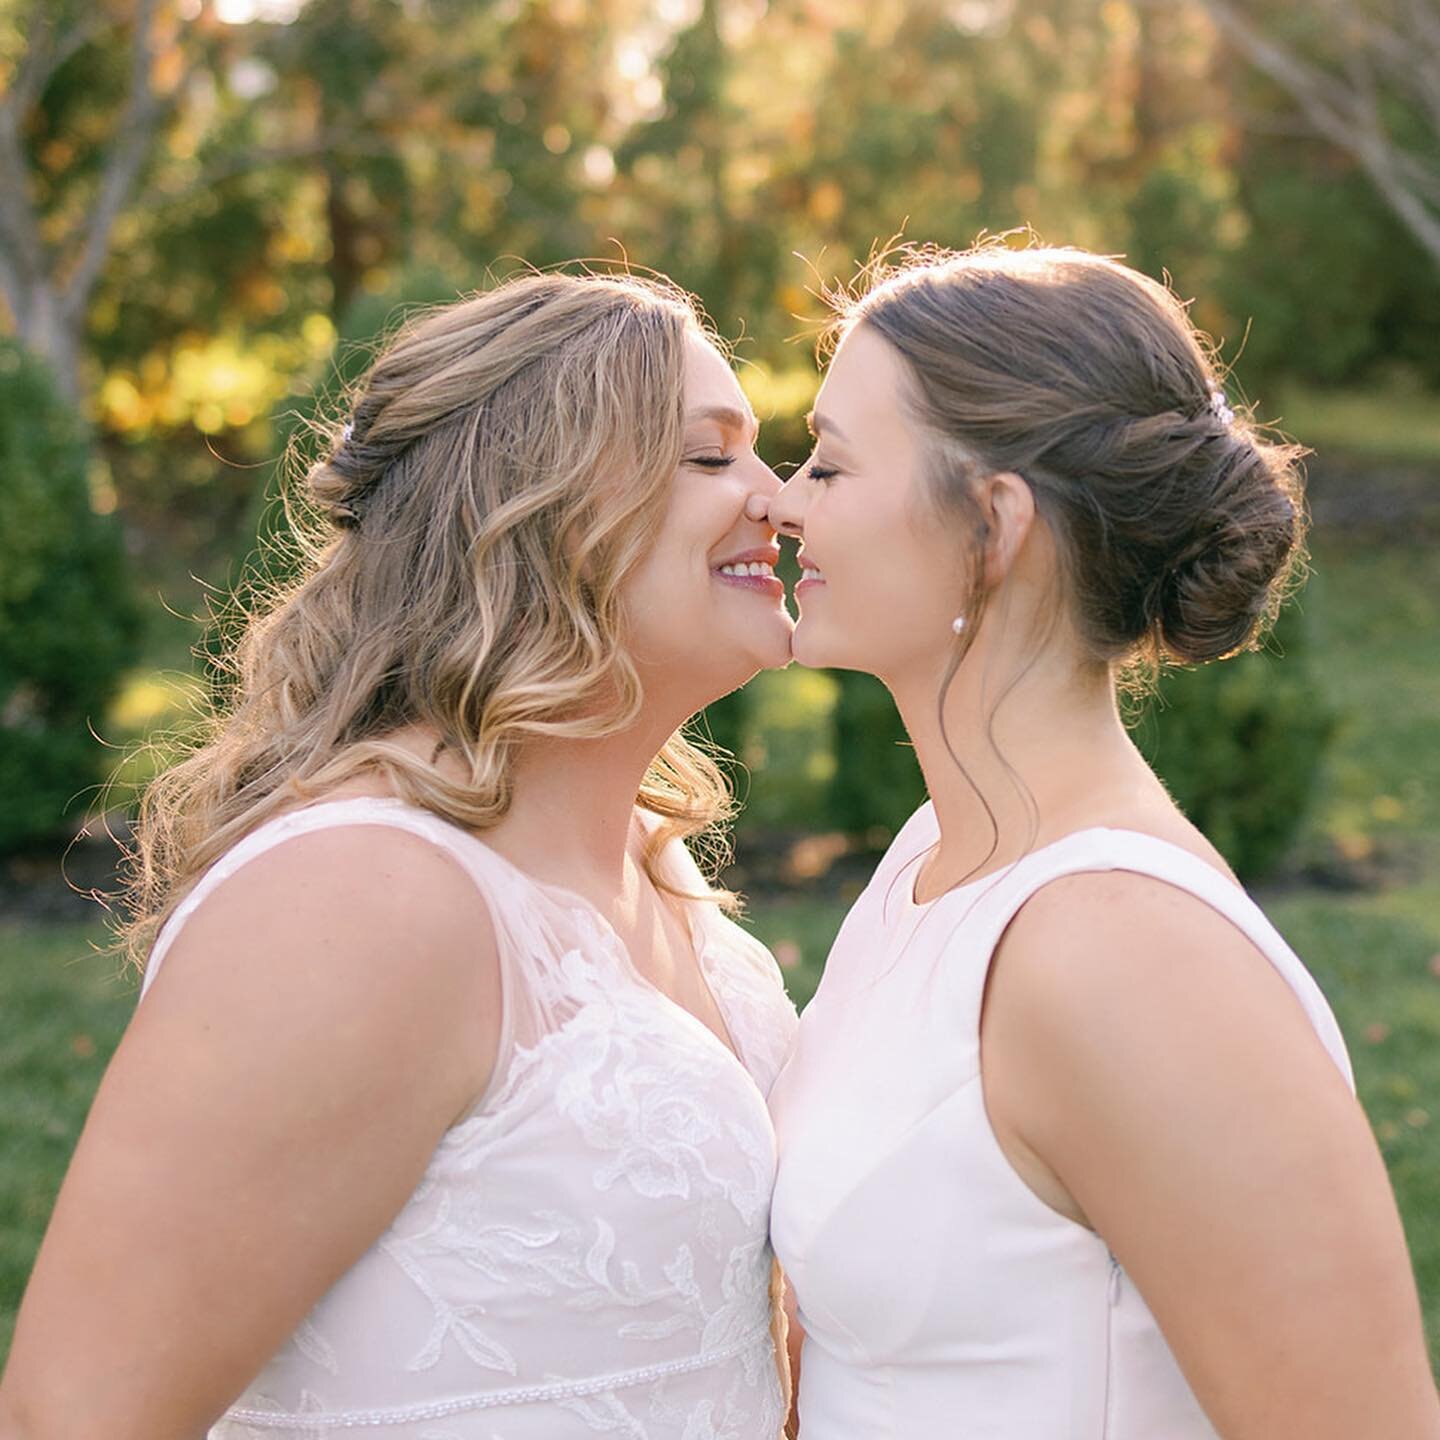 Our boxwood garden makes for the most beautiful golden hour portraits. Congratulations to Brittany and Lindsay on their October wedding. We wish you a lifetime of happiness! 

photographer - @patcoriphotography 
florals - Sunnybrook 
hair - @loveatfi